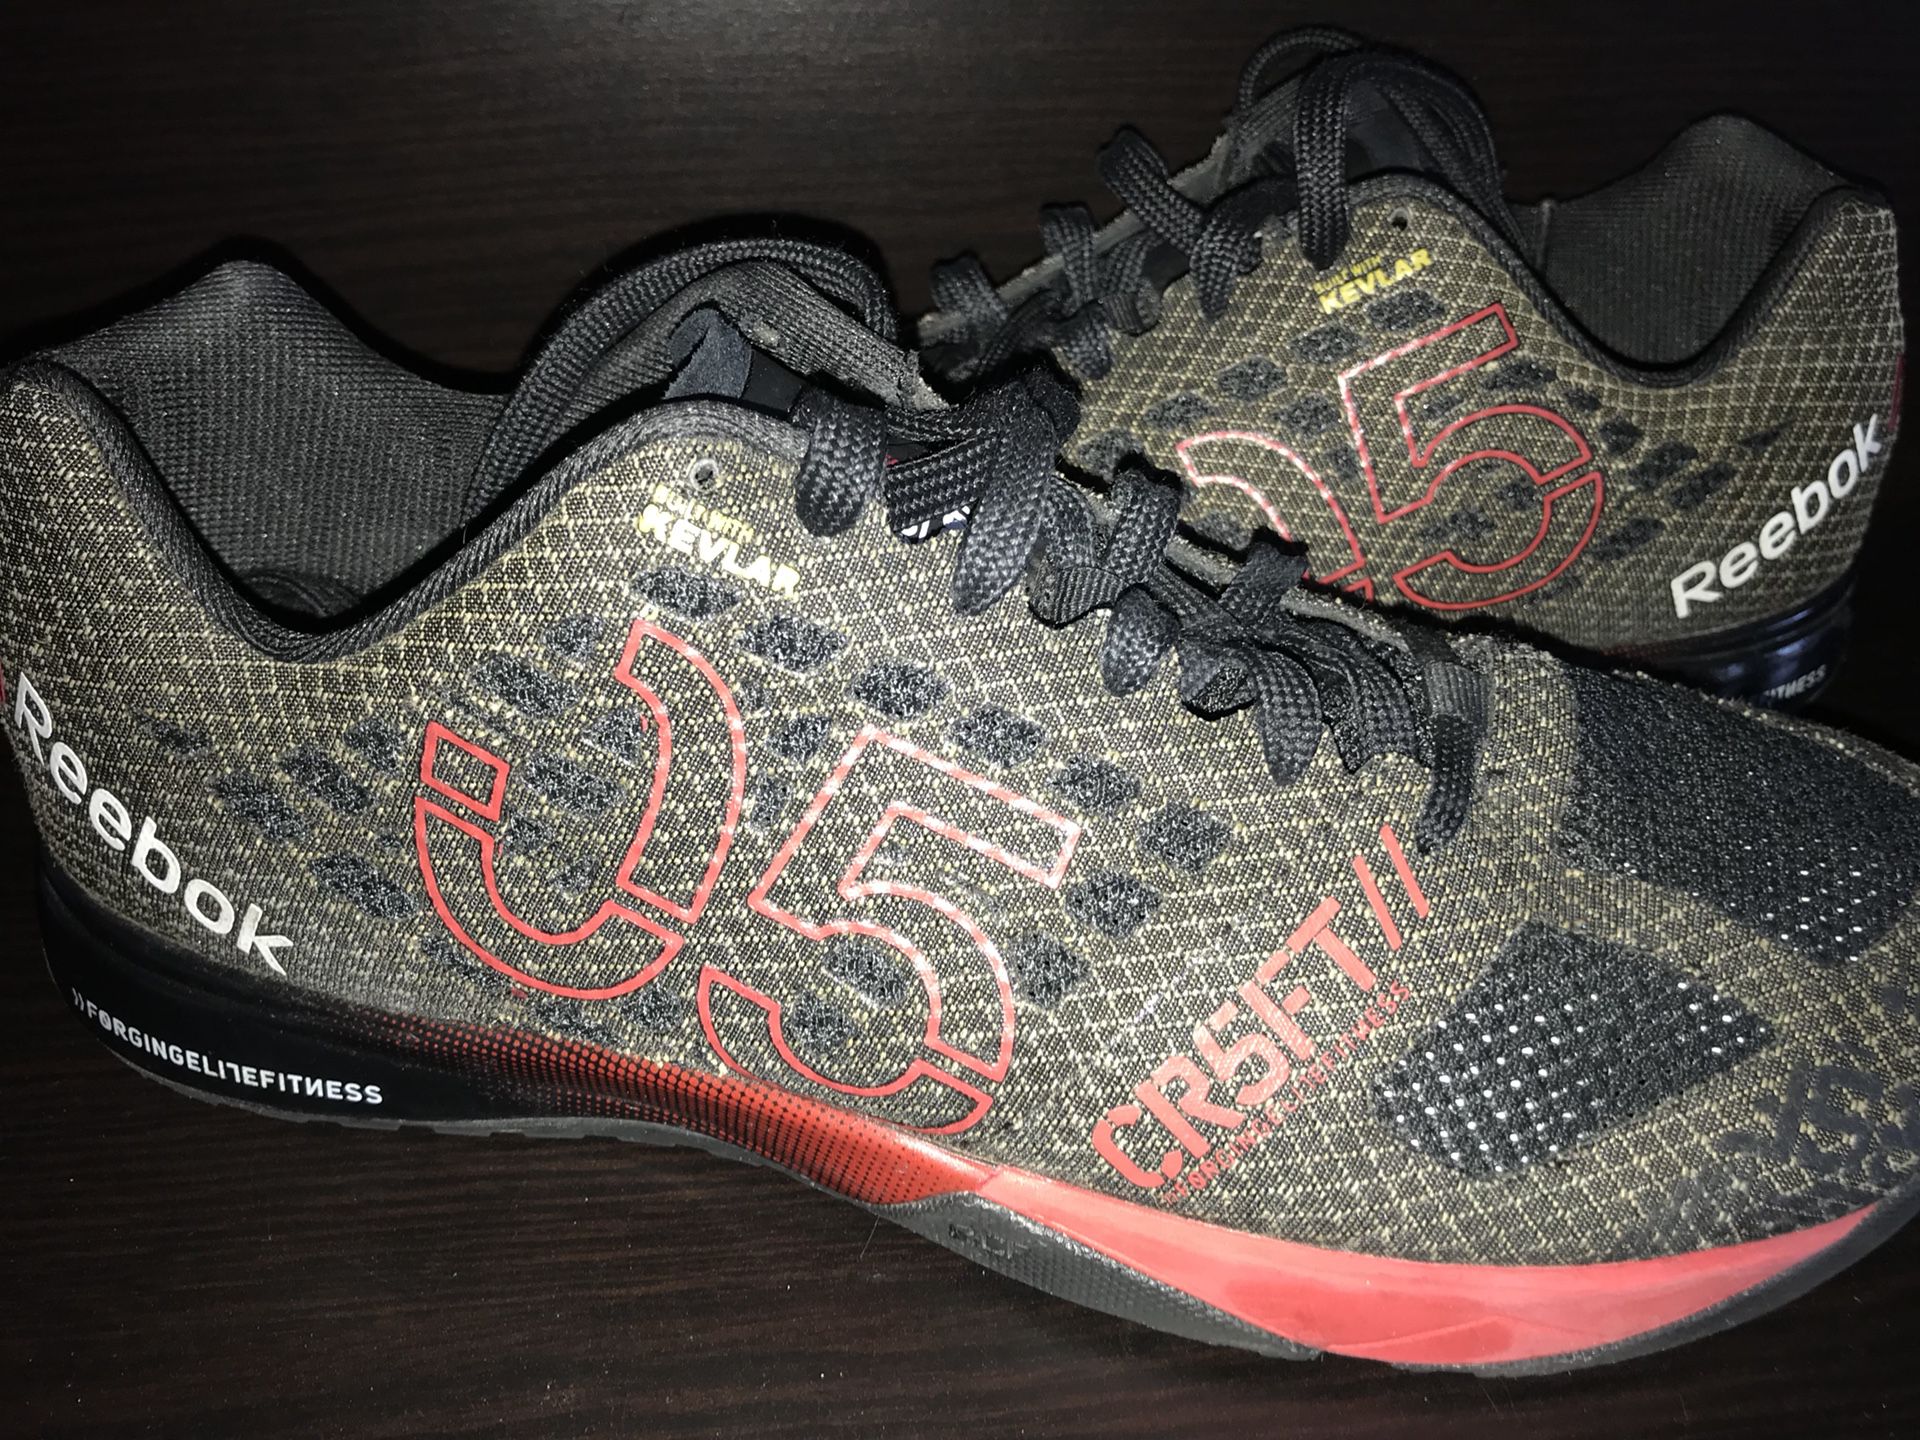 REEBOK Crossfit training CR5FT CF.0021 built with Kevlar mens 10.5 Used Condition Sale in San Leandro, CA - OfferUp